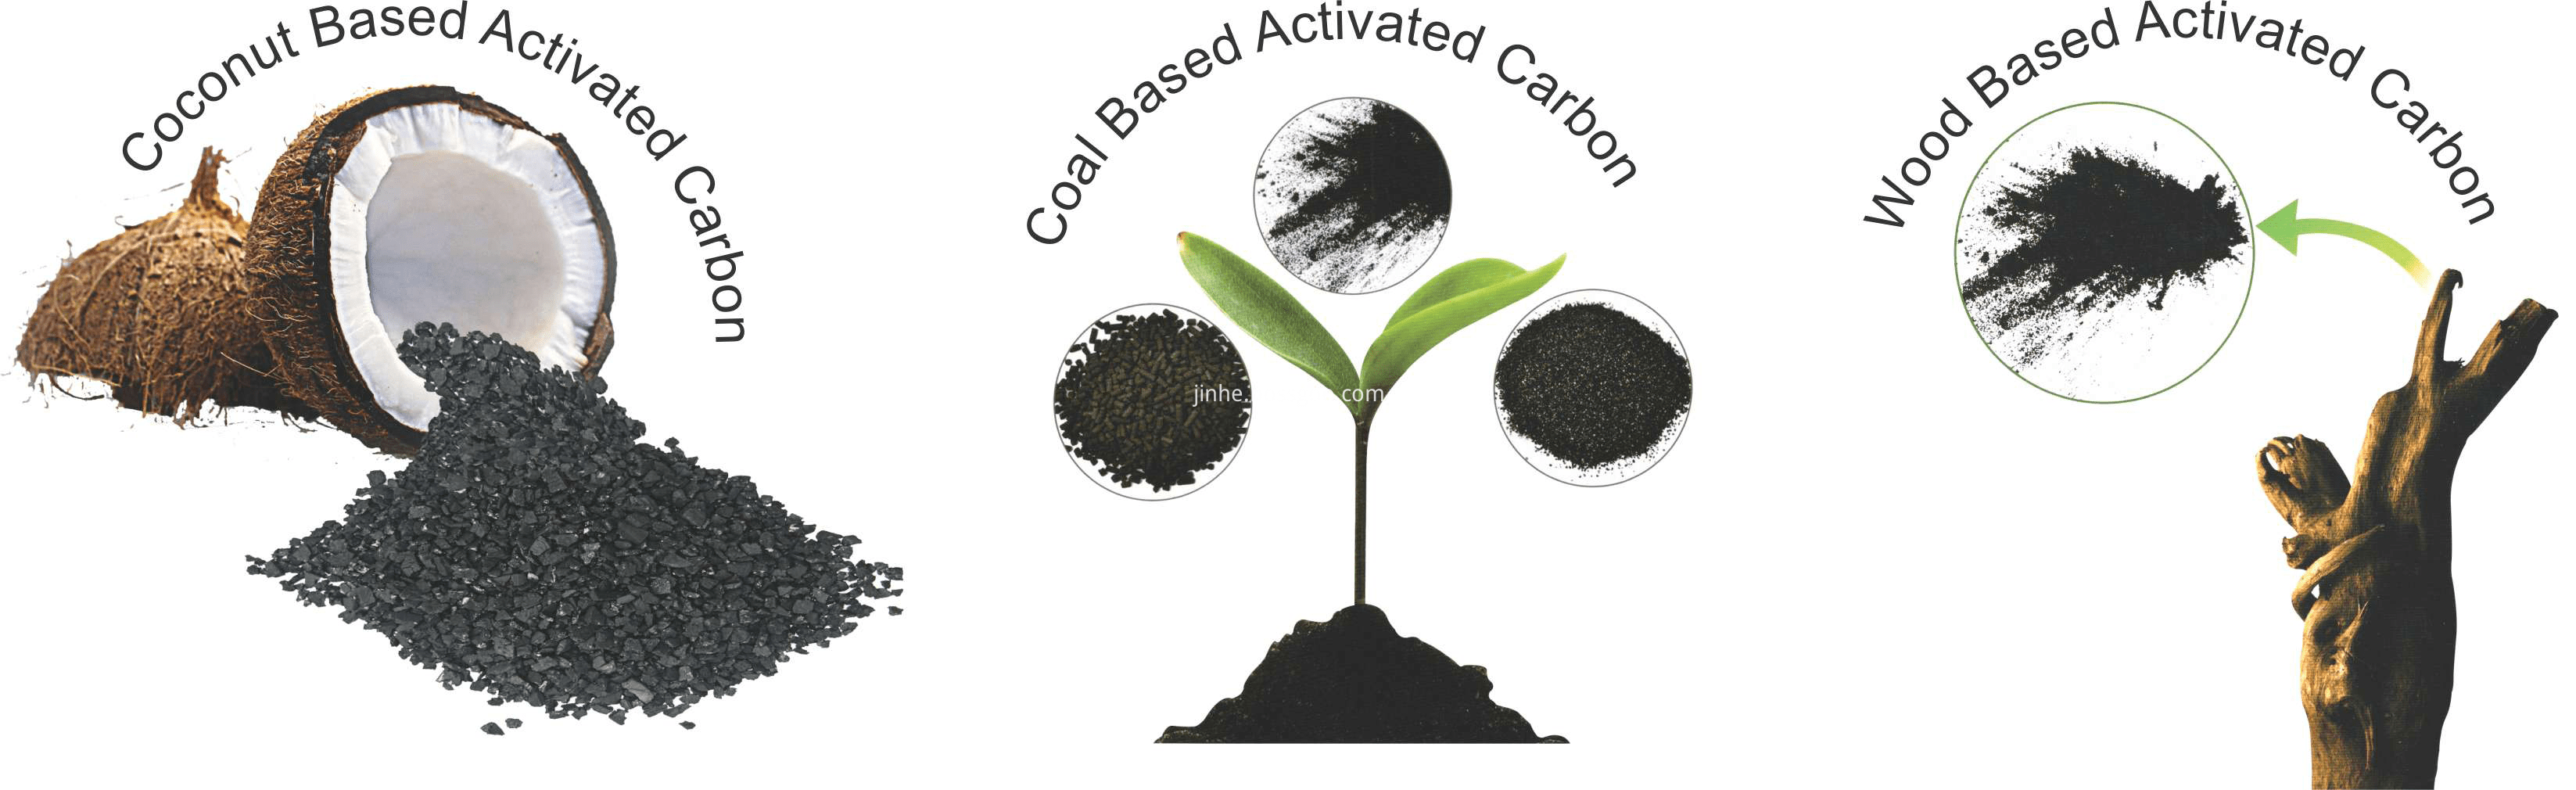 Coconut-Shell Carbon And Coal Carbon For Water Purification